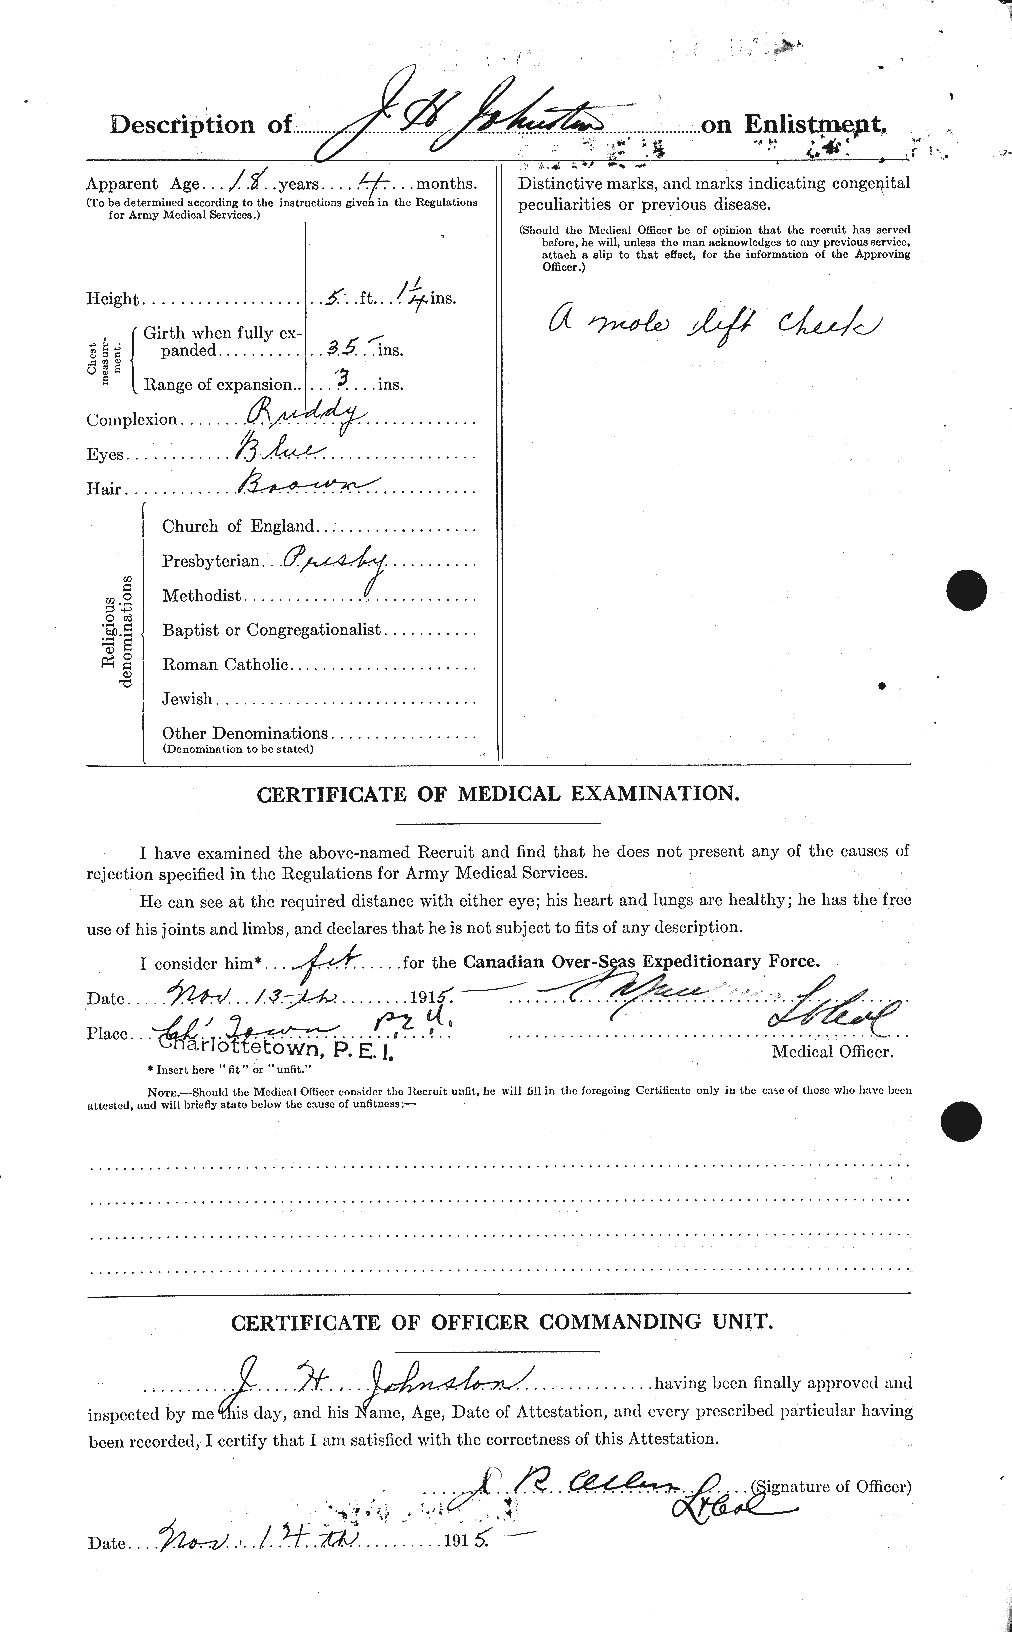 Personnel Records of the First World War - CEF 422837b